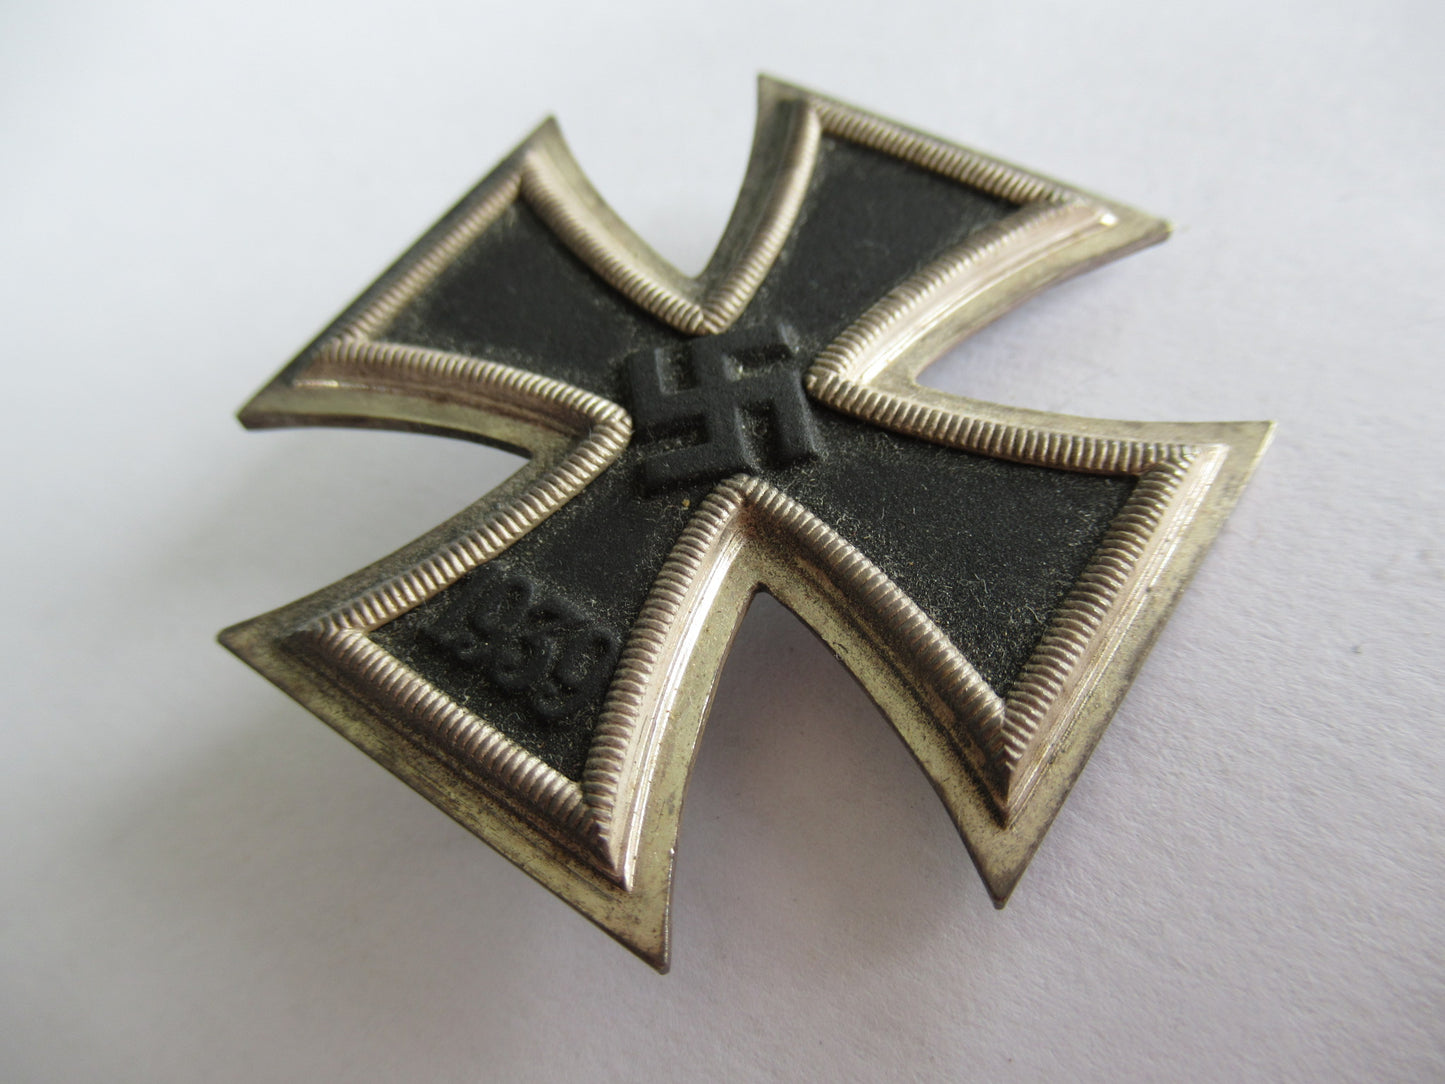 GERMANY III REICH IRON CROSS 1939 1ST CLASS. MARKED "65". BOXED. 23.